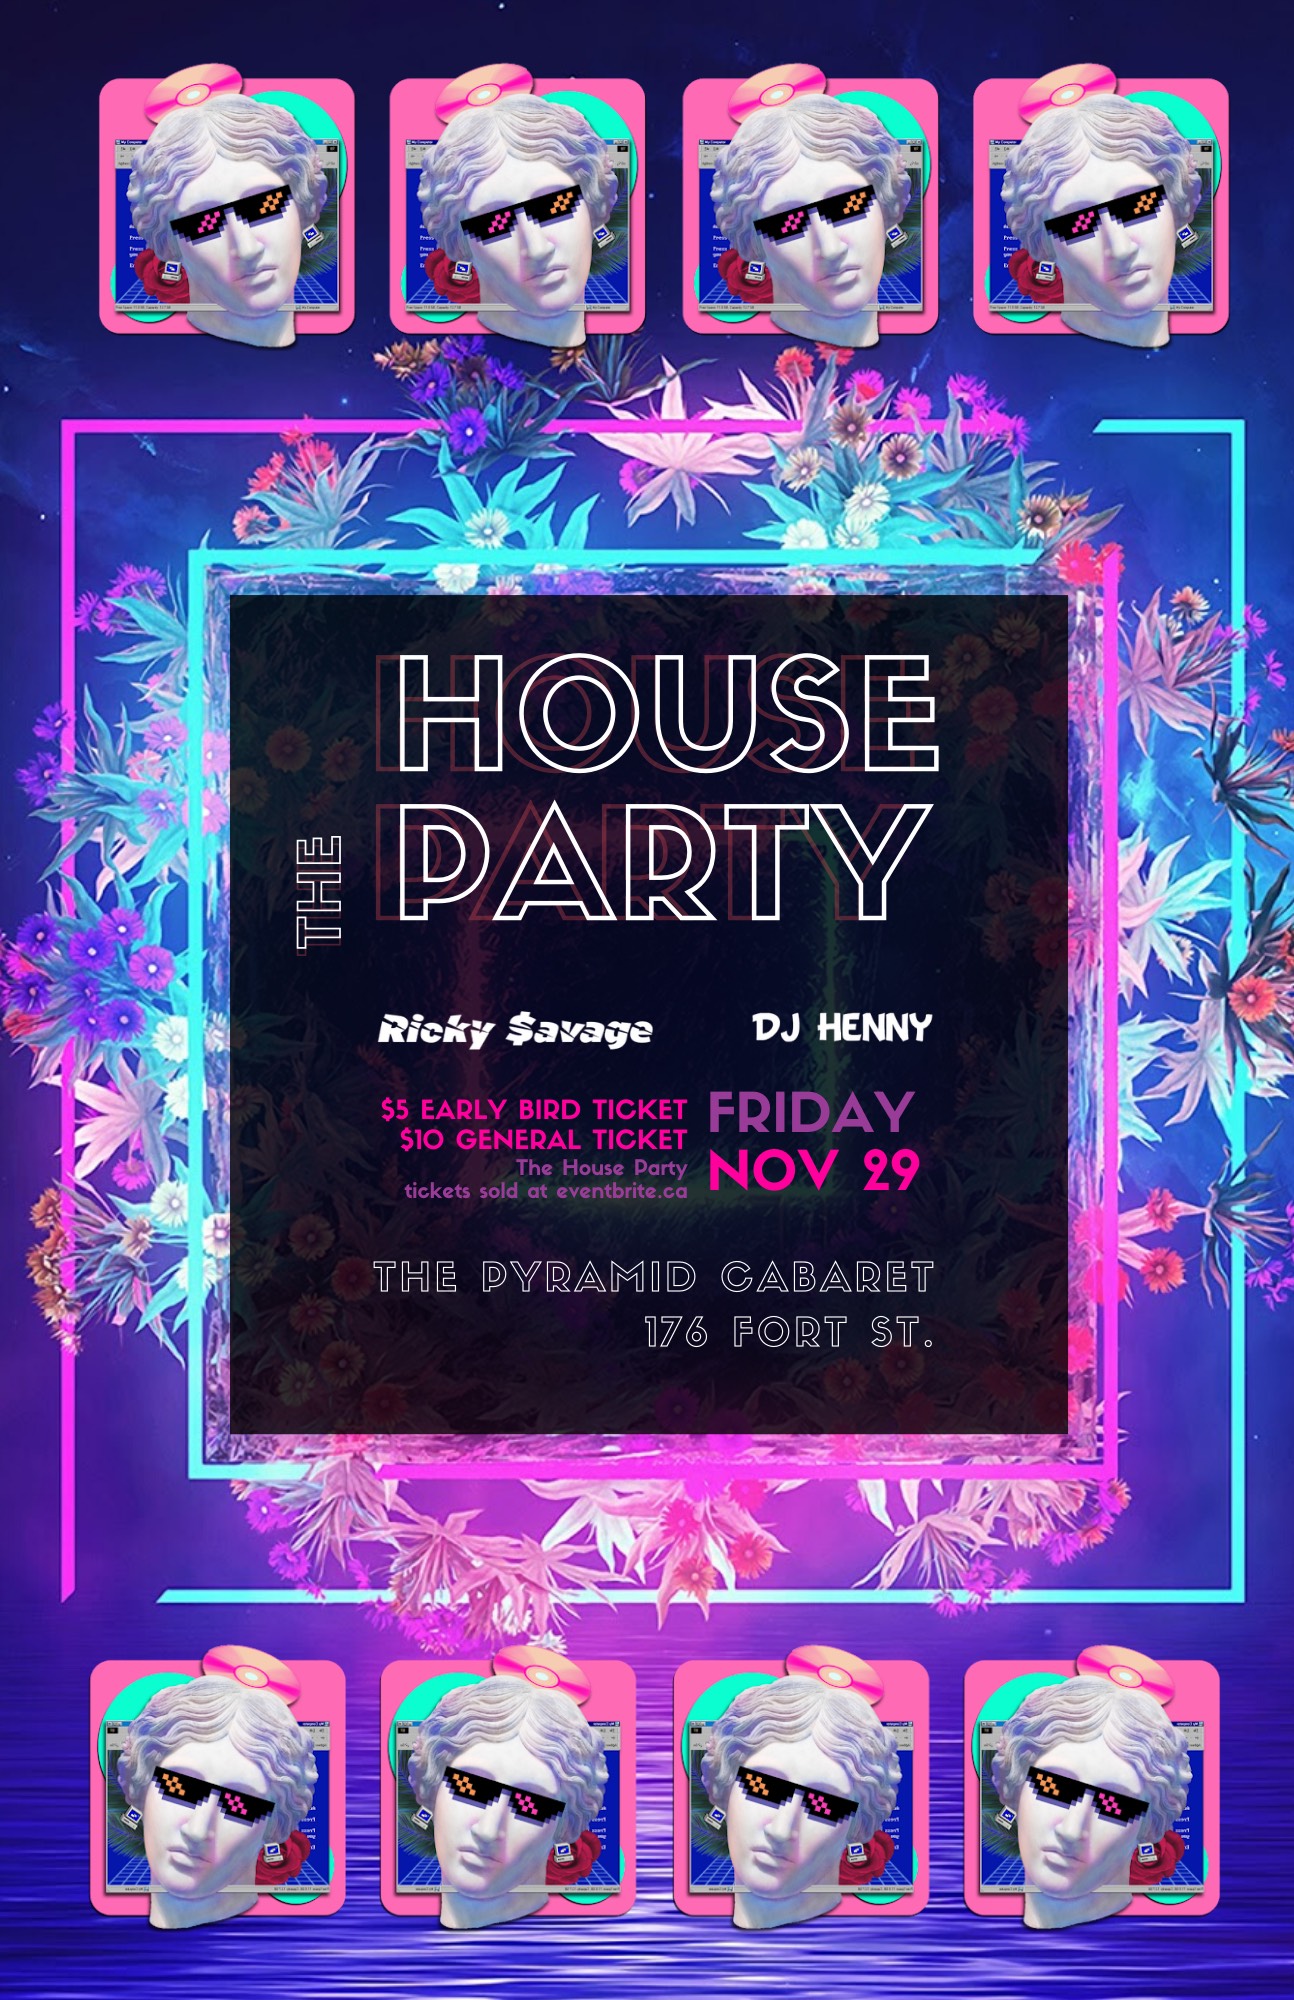 HOUSE PARTY at The Pyramid Cabaret